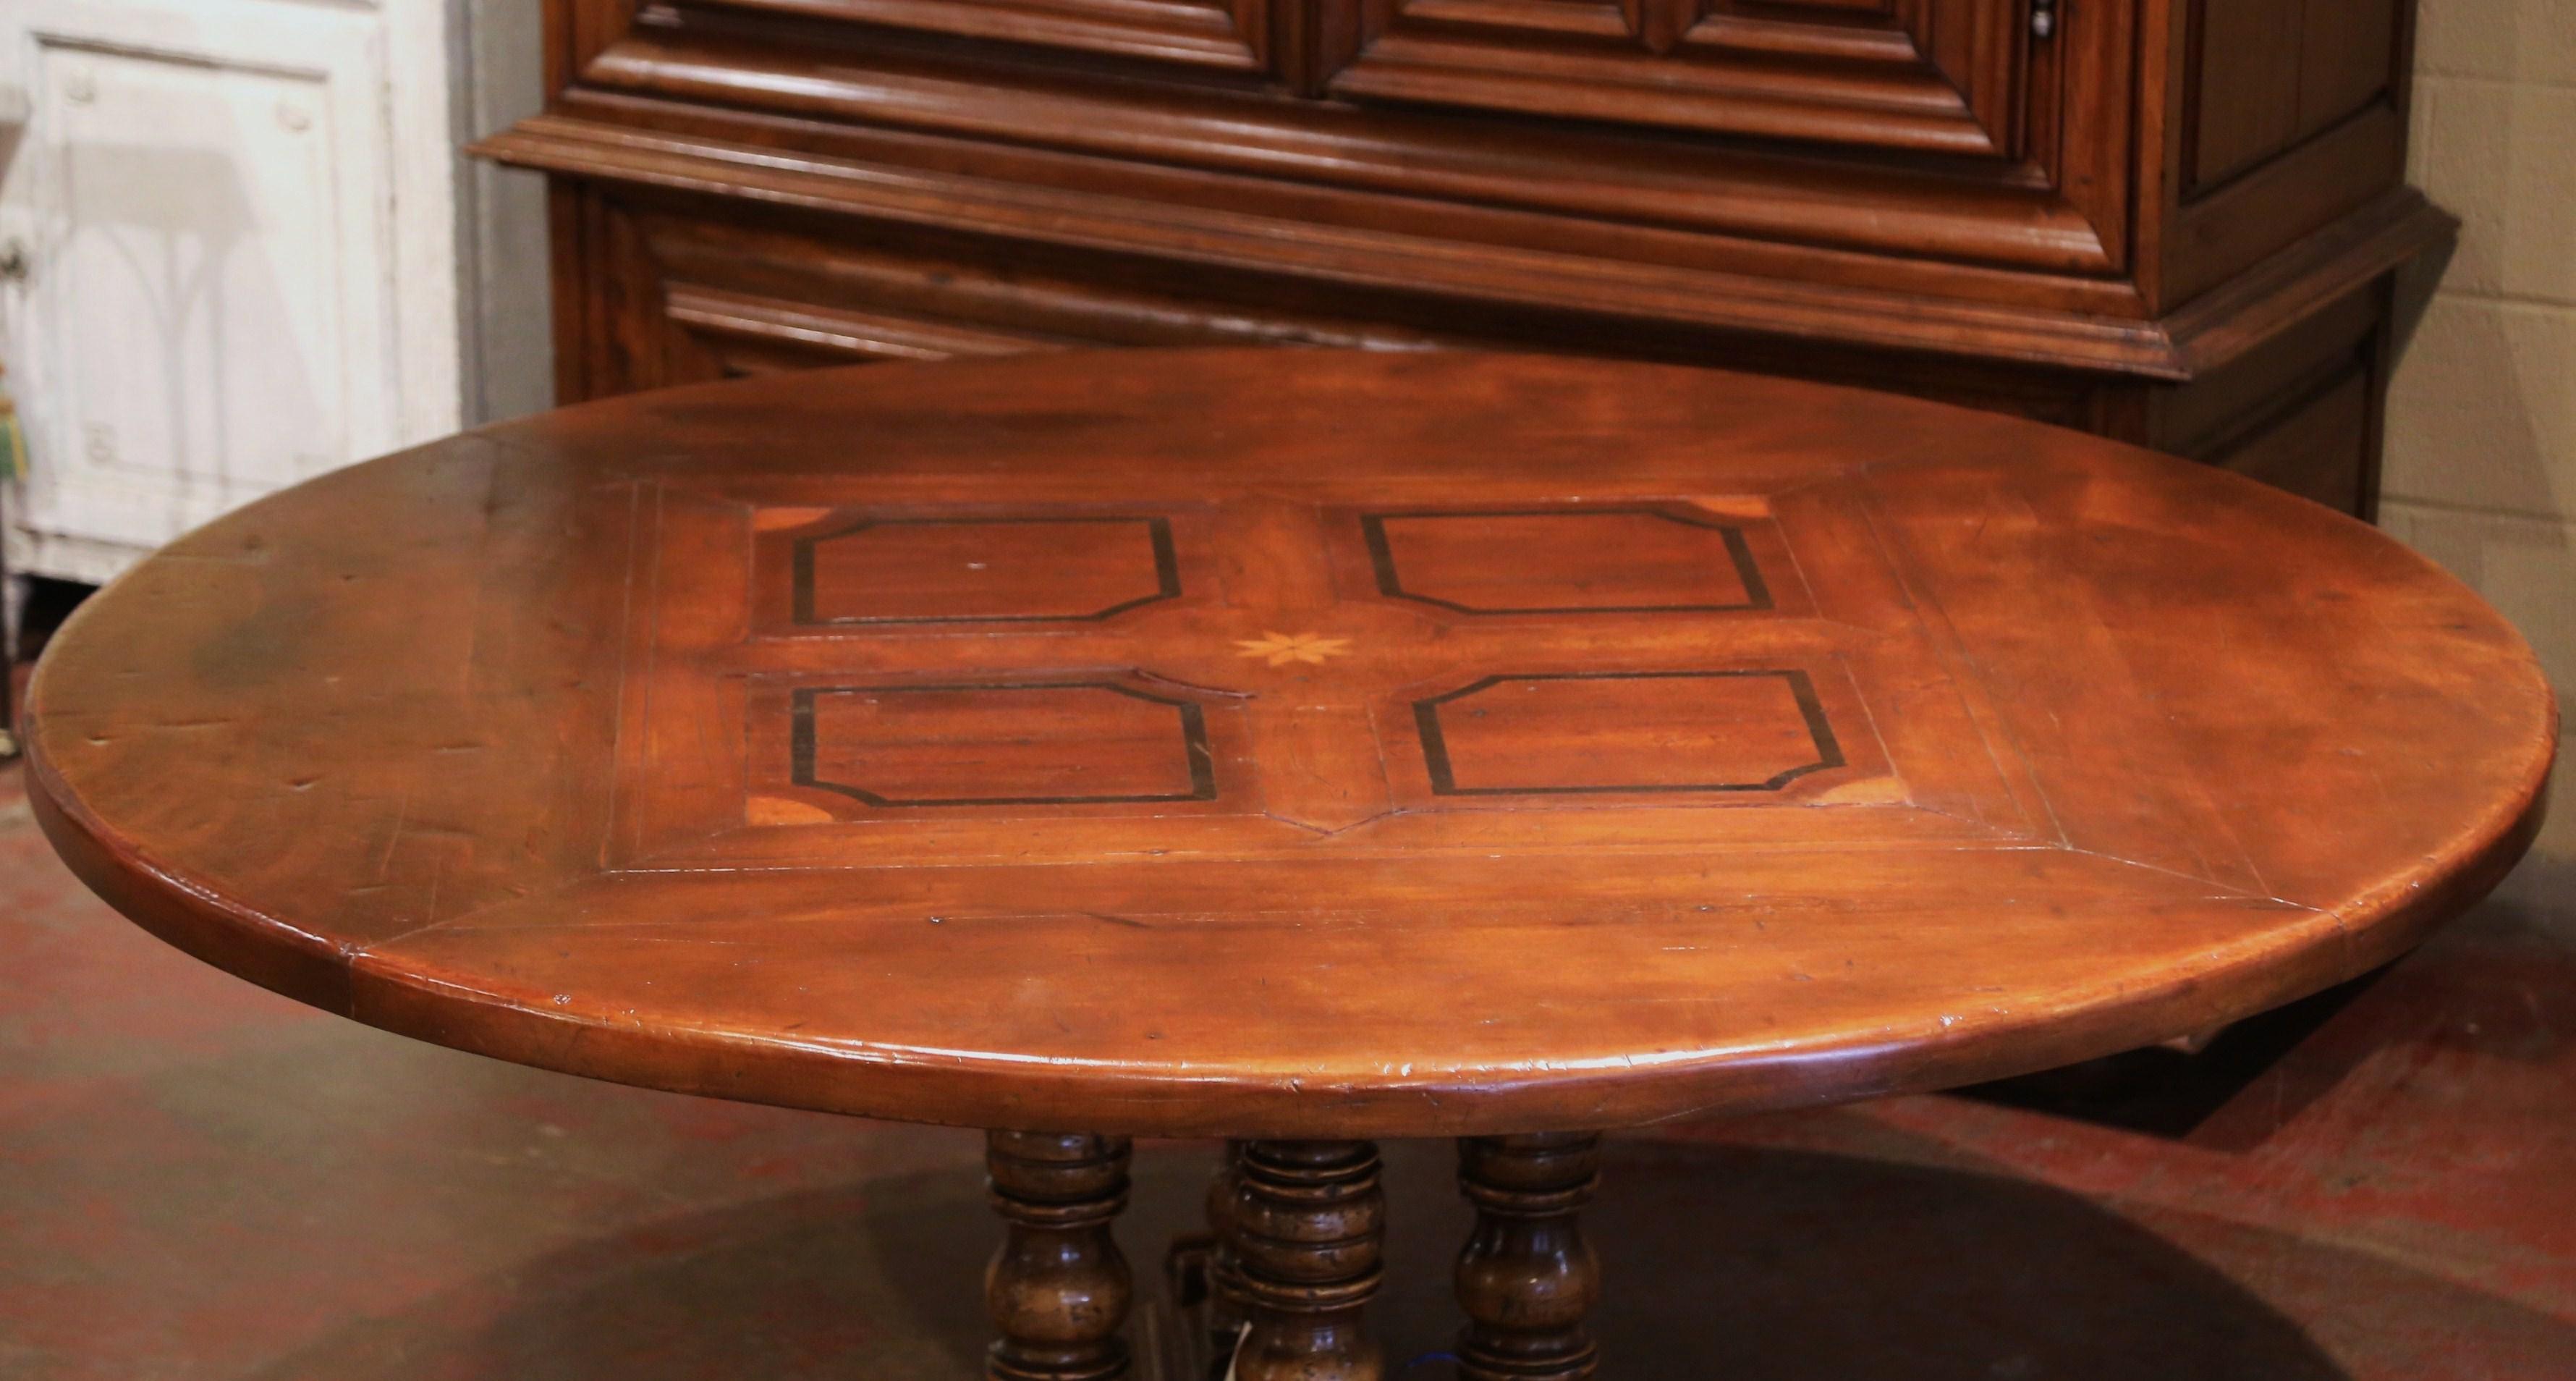 Crafted in the Pyrenees mountains of France half a century ago with 18th and 19th century old timber, the elegant six foot round table stands on a sturdy four hand turned columns pedestal base, supported by flat, hand carved feet for ultimate